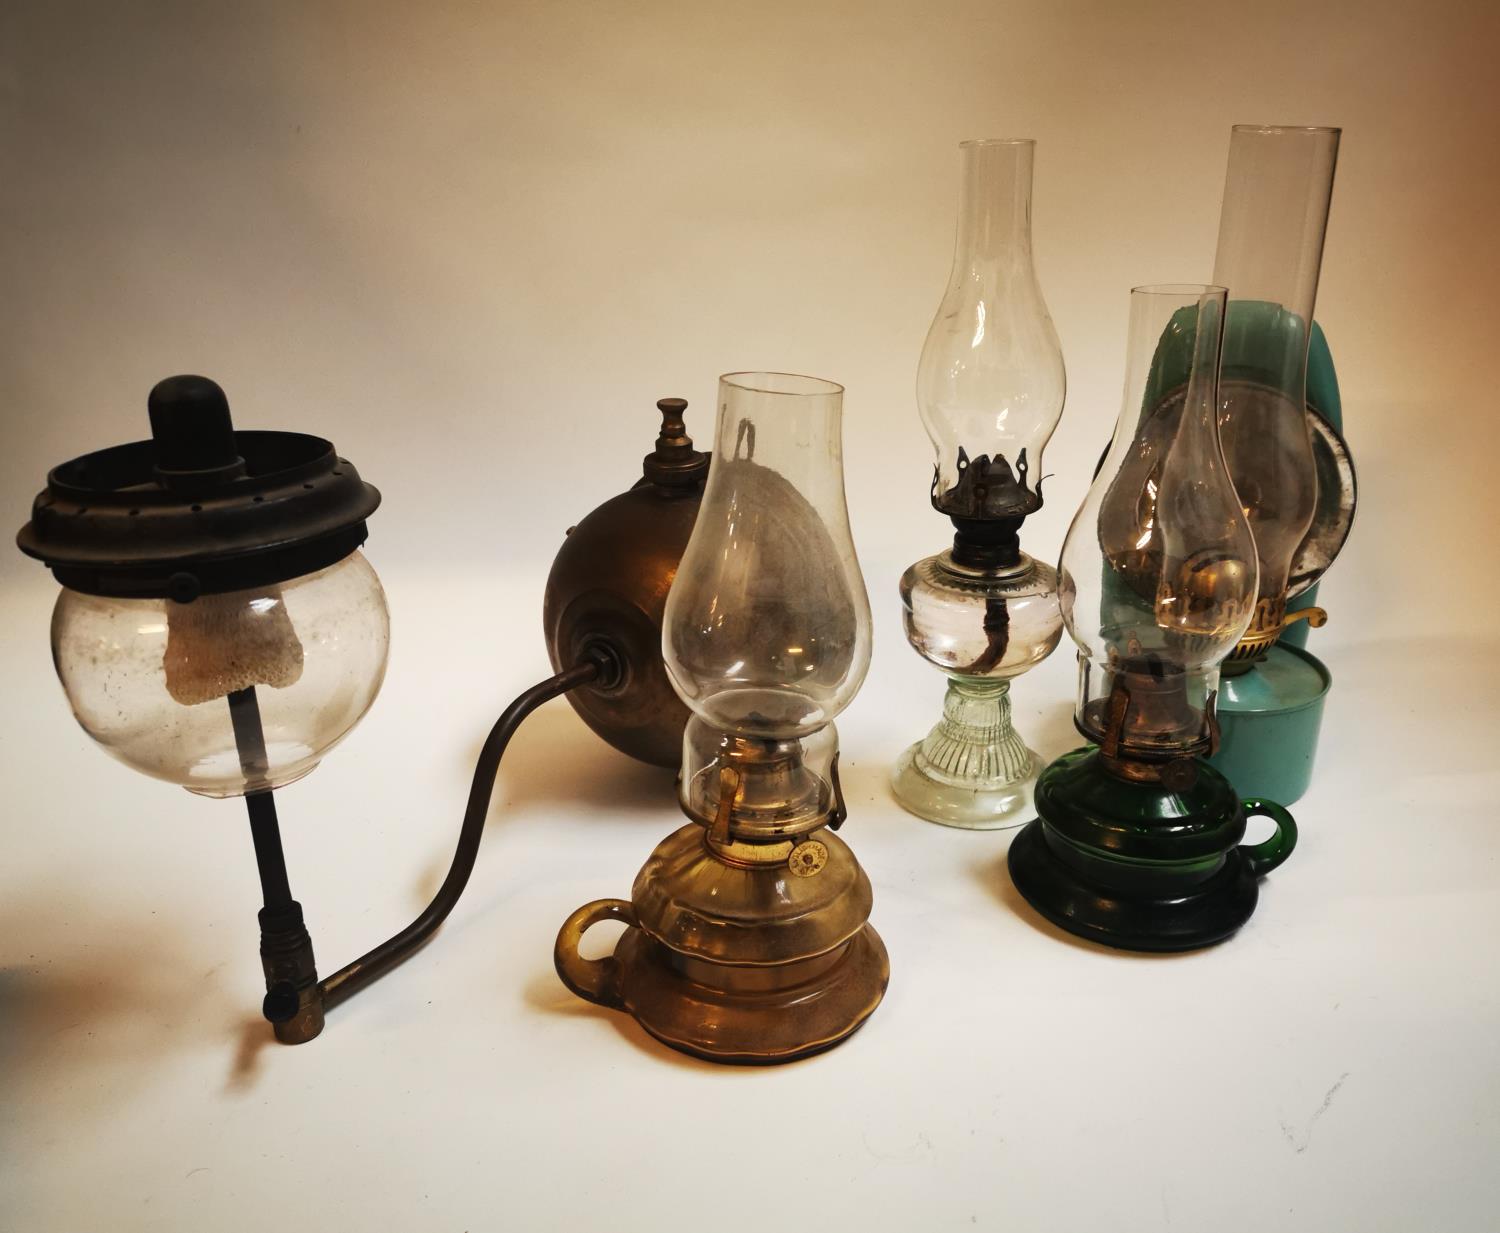 Collection of early 20th C. thumb lamps and a tilly lamp.